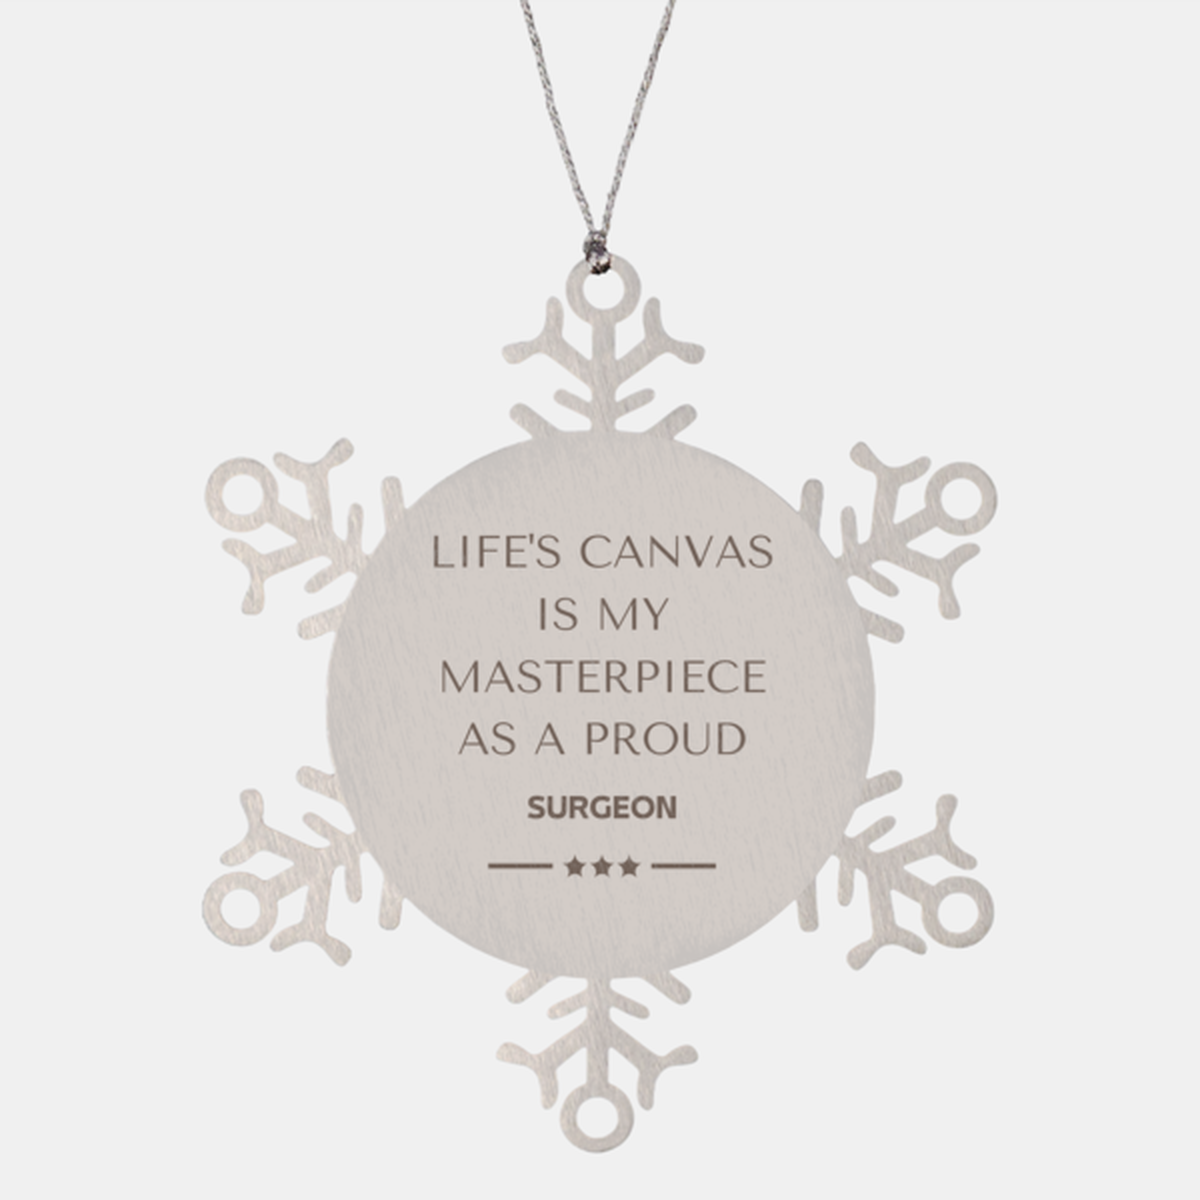 Proud Surgeon Gifts, Life's canvas is my masterpiece, Epic Birthday Christmas Unique Snowflake Ornament For Surgeon, Coworkers, Men, Women, Friends